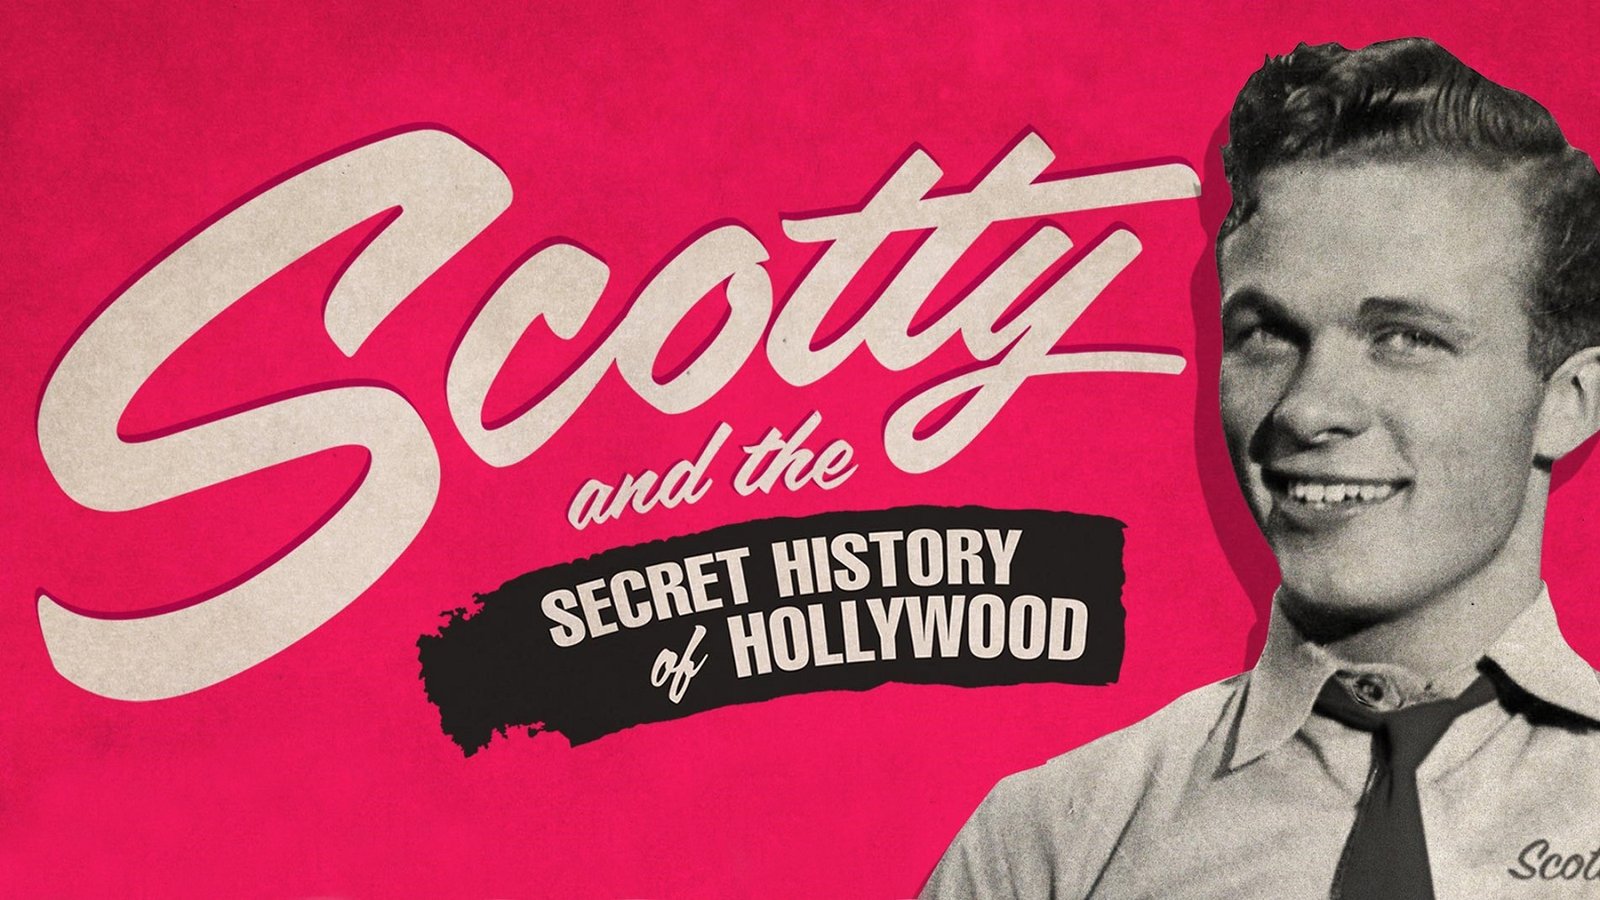 Scotty and the Secret History of Hollywood - The Secret Lives of Classic Hollywood Stars